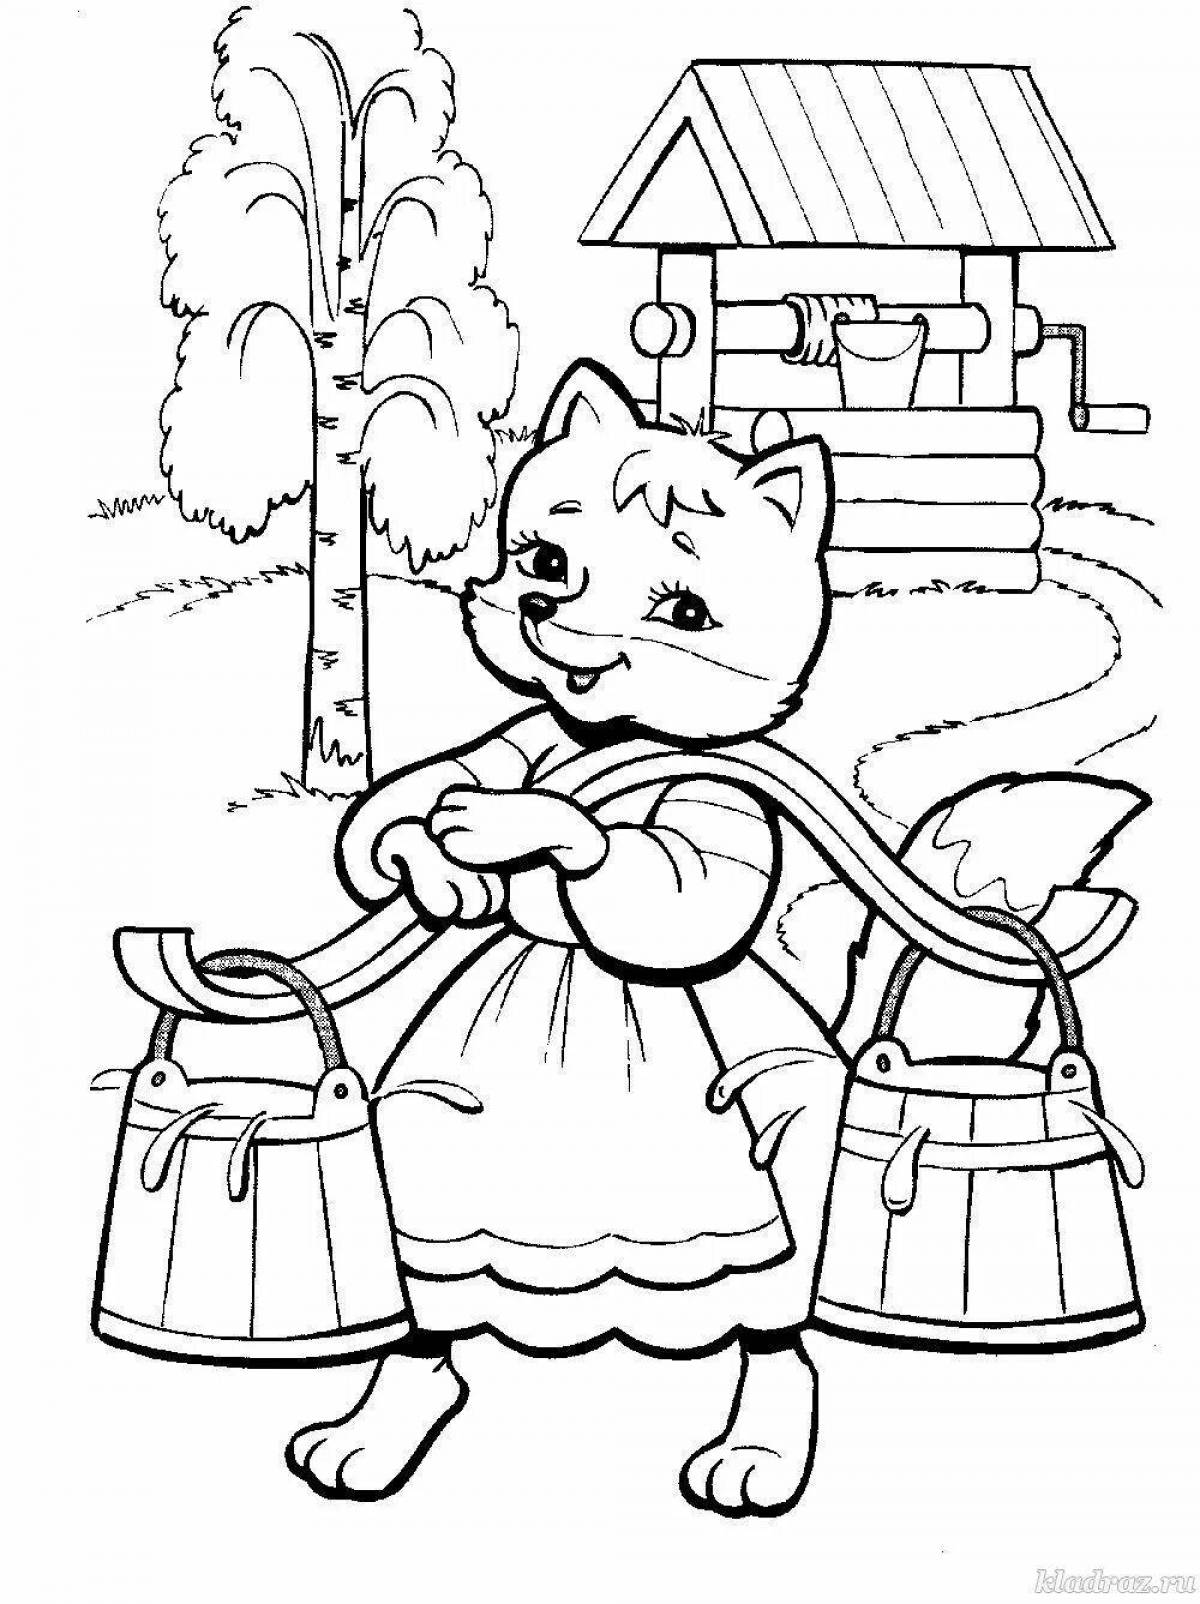 Bright coloring fairytale fox with a rolling pin